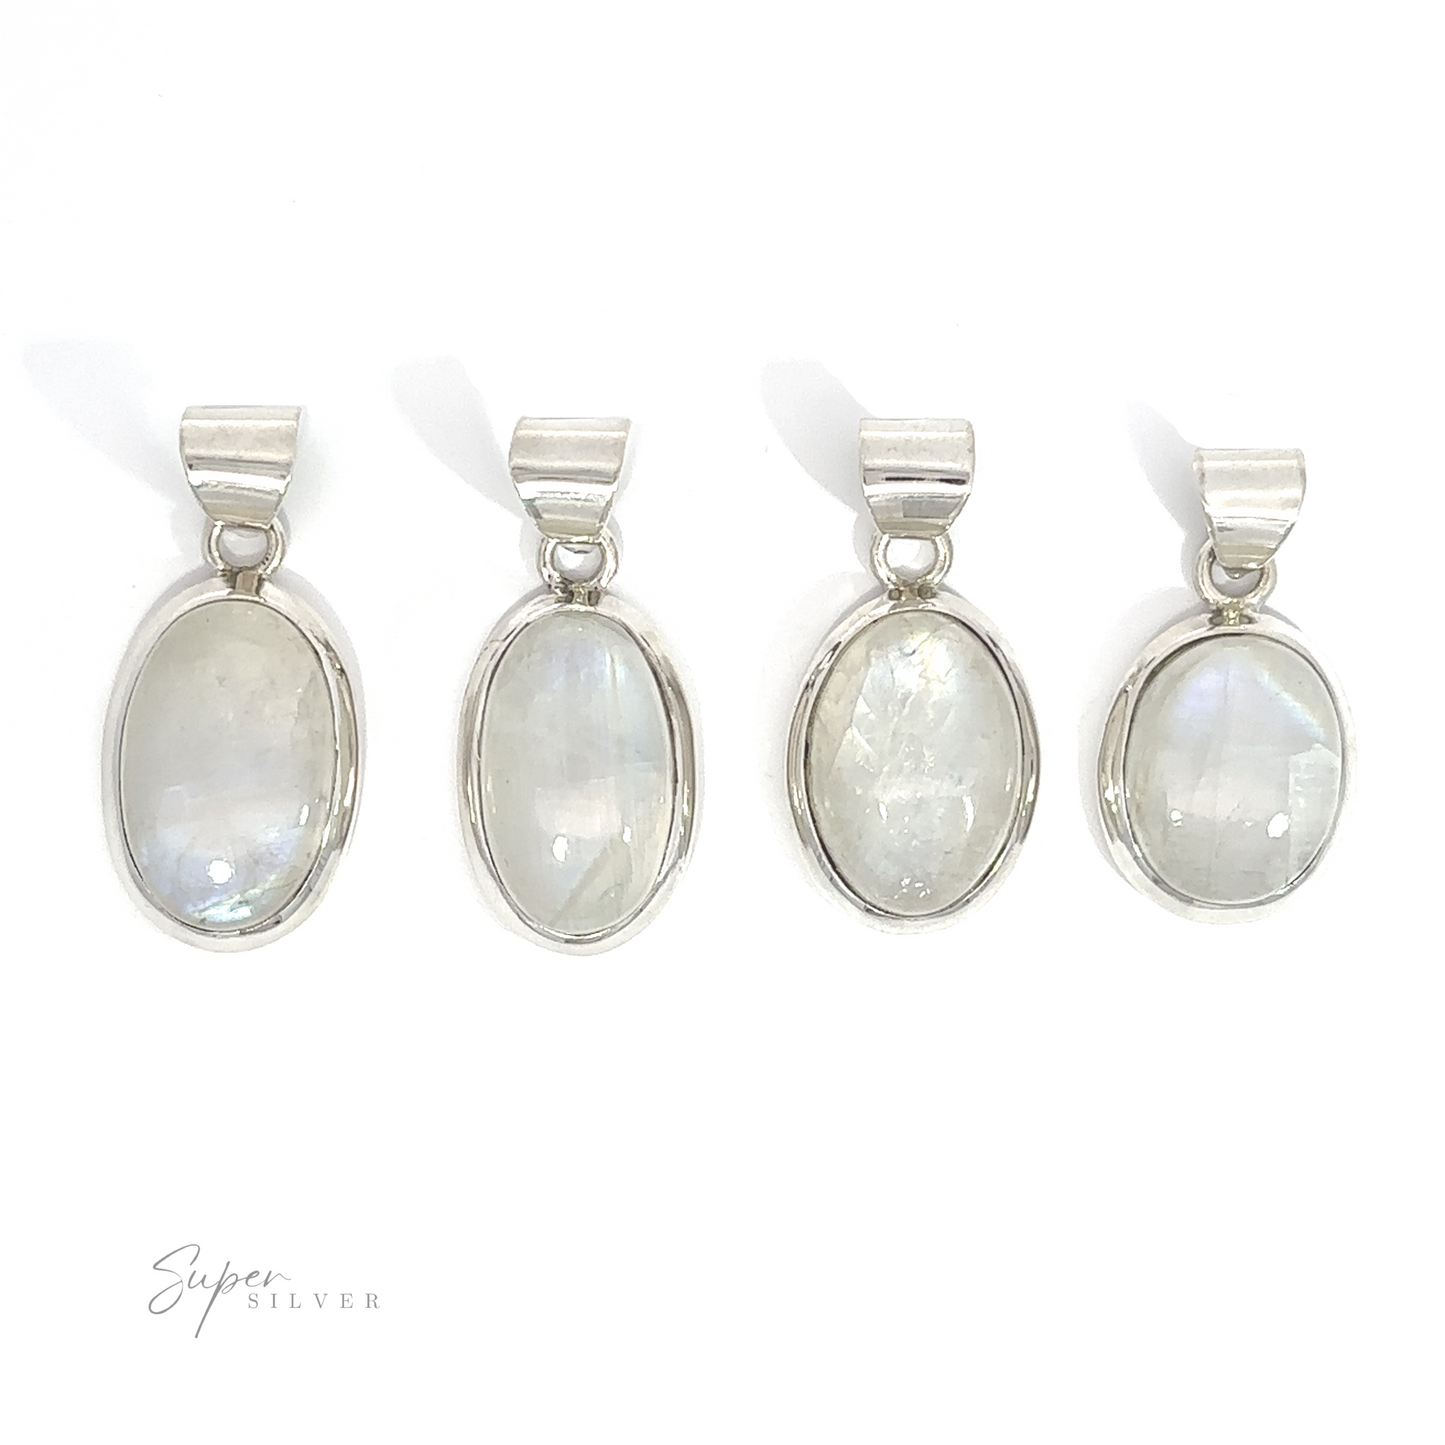 Four Simple Moonstone Oval Pendants, displayed in a row against a white background, each showing varying luminescence.